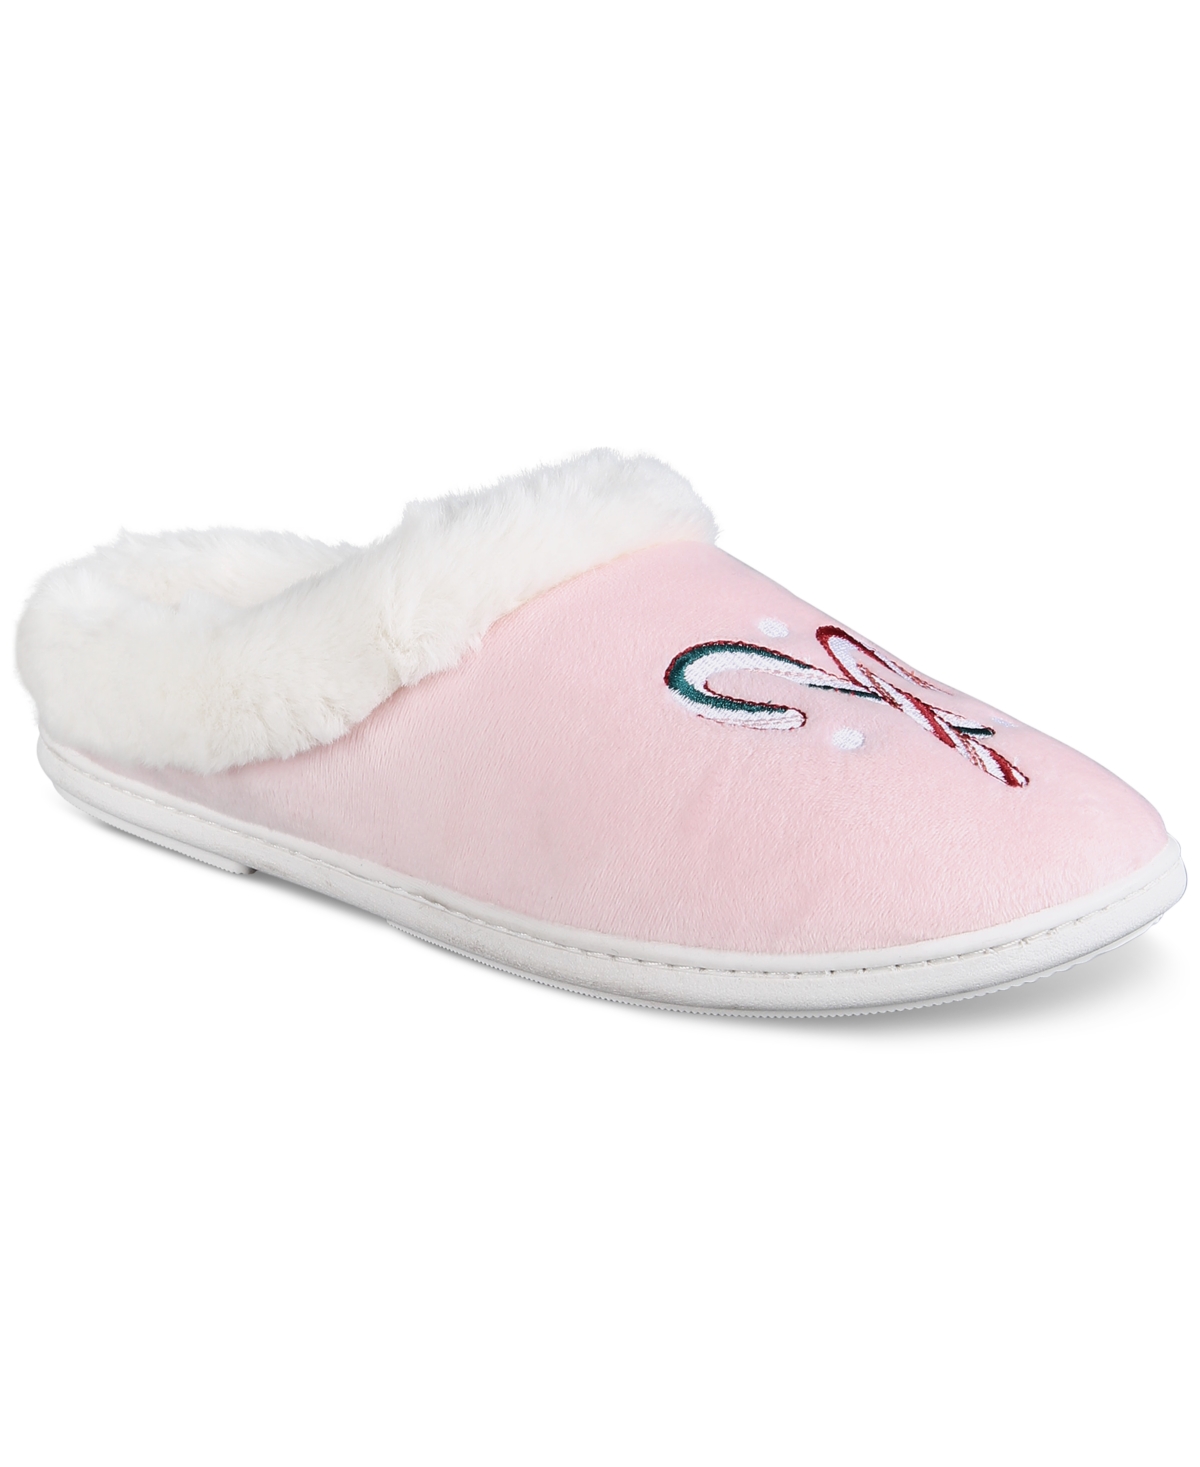 Women's Holiday Boxed Hoodback Slippers, Created for Macy's - Dachshund